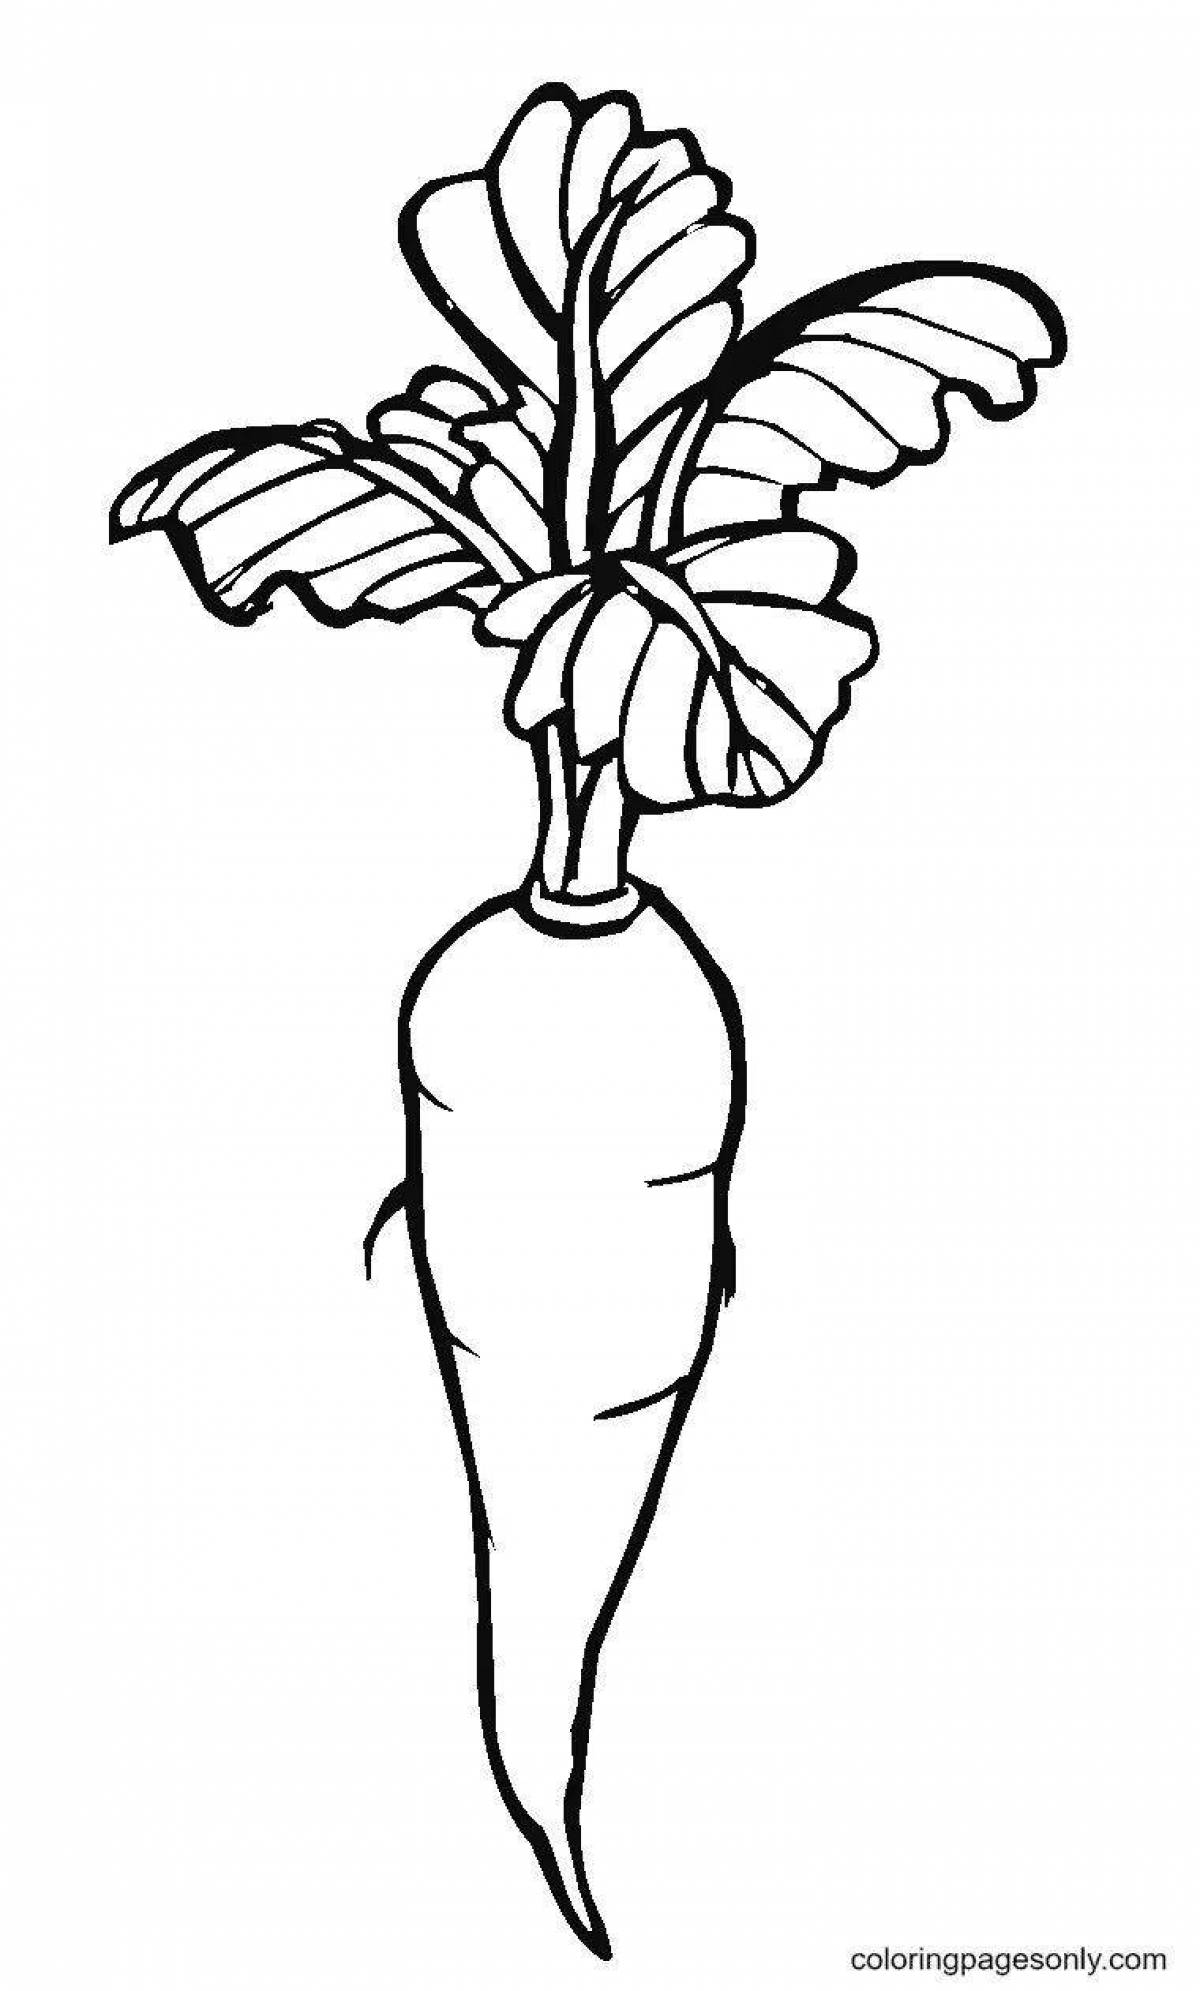 Charming carrot coloring page